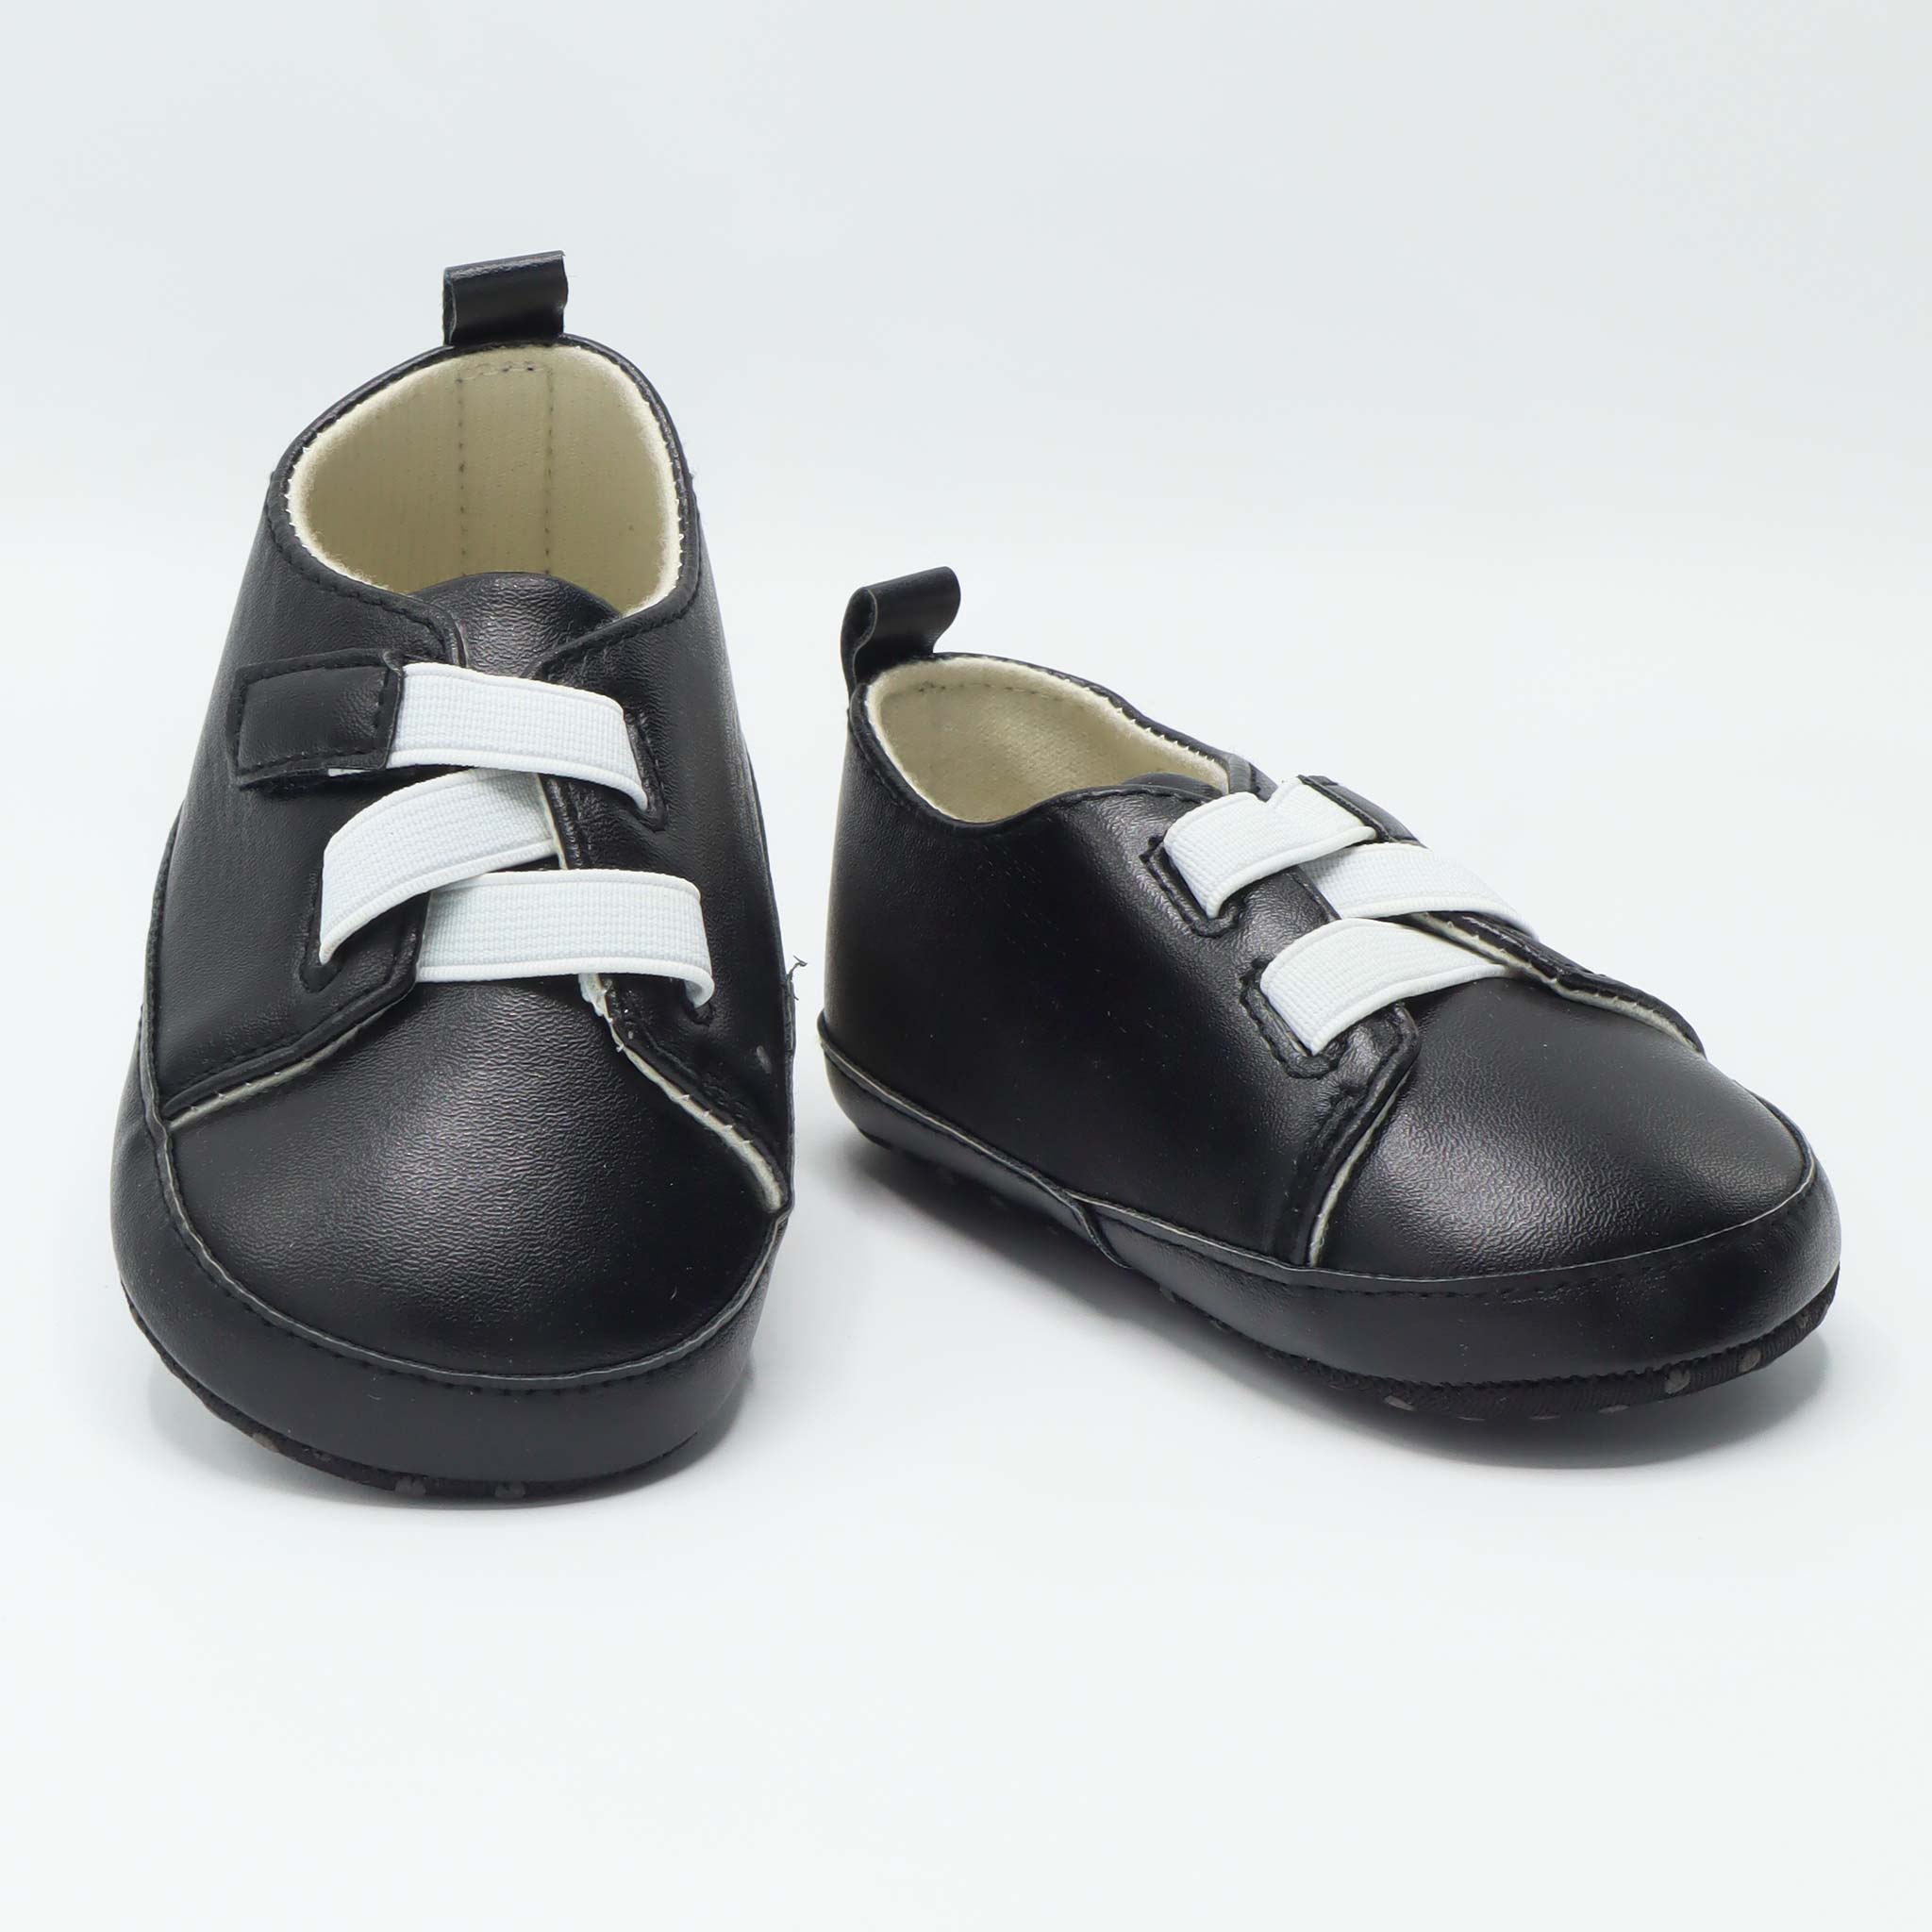 Baby Sneaker Black Color with White Laces